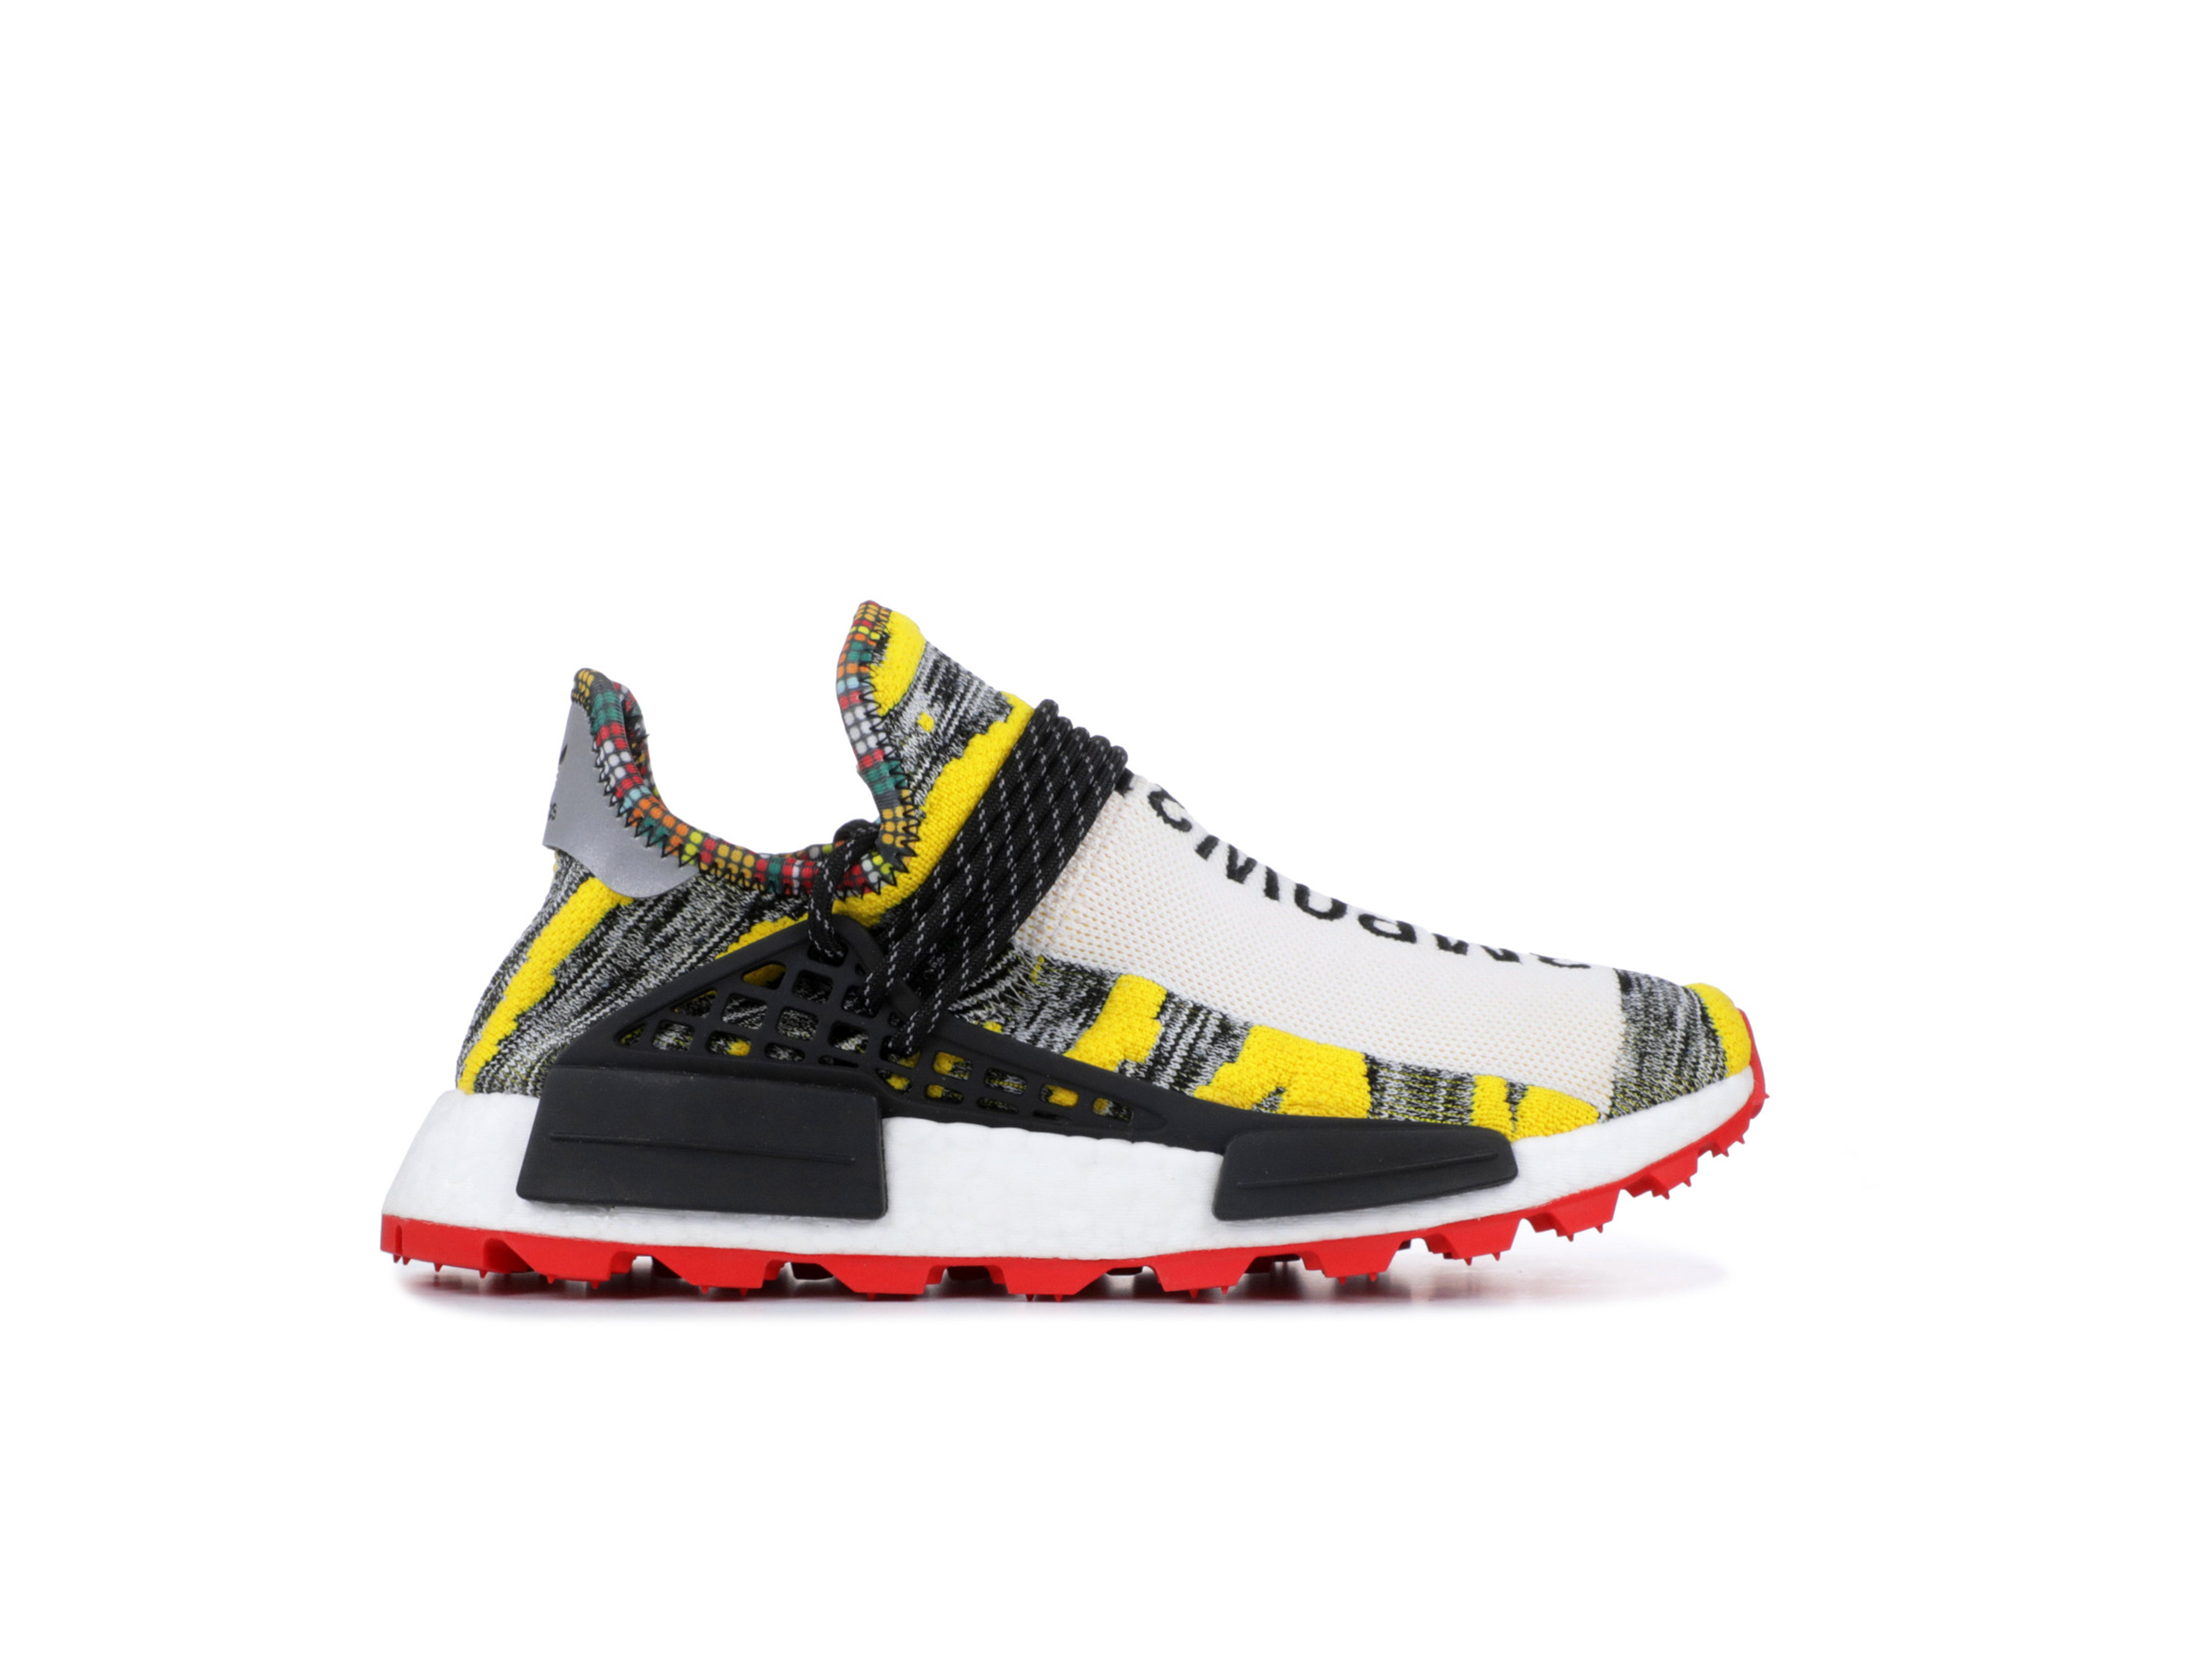 Adidas Adidas X Pharrell Williams Race NMD Trail Pack Powder Blue Size Available Immediate Sale At Sotheby's |